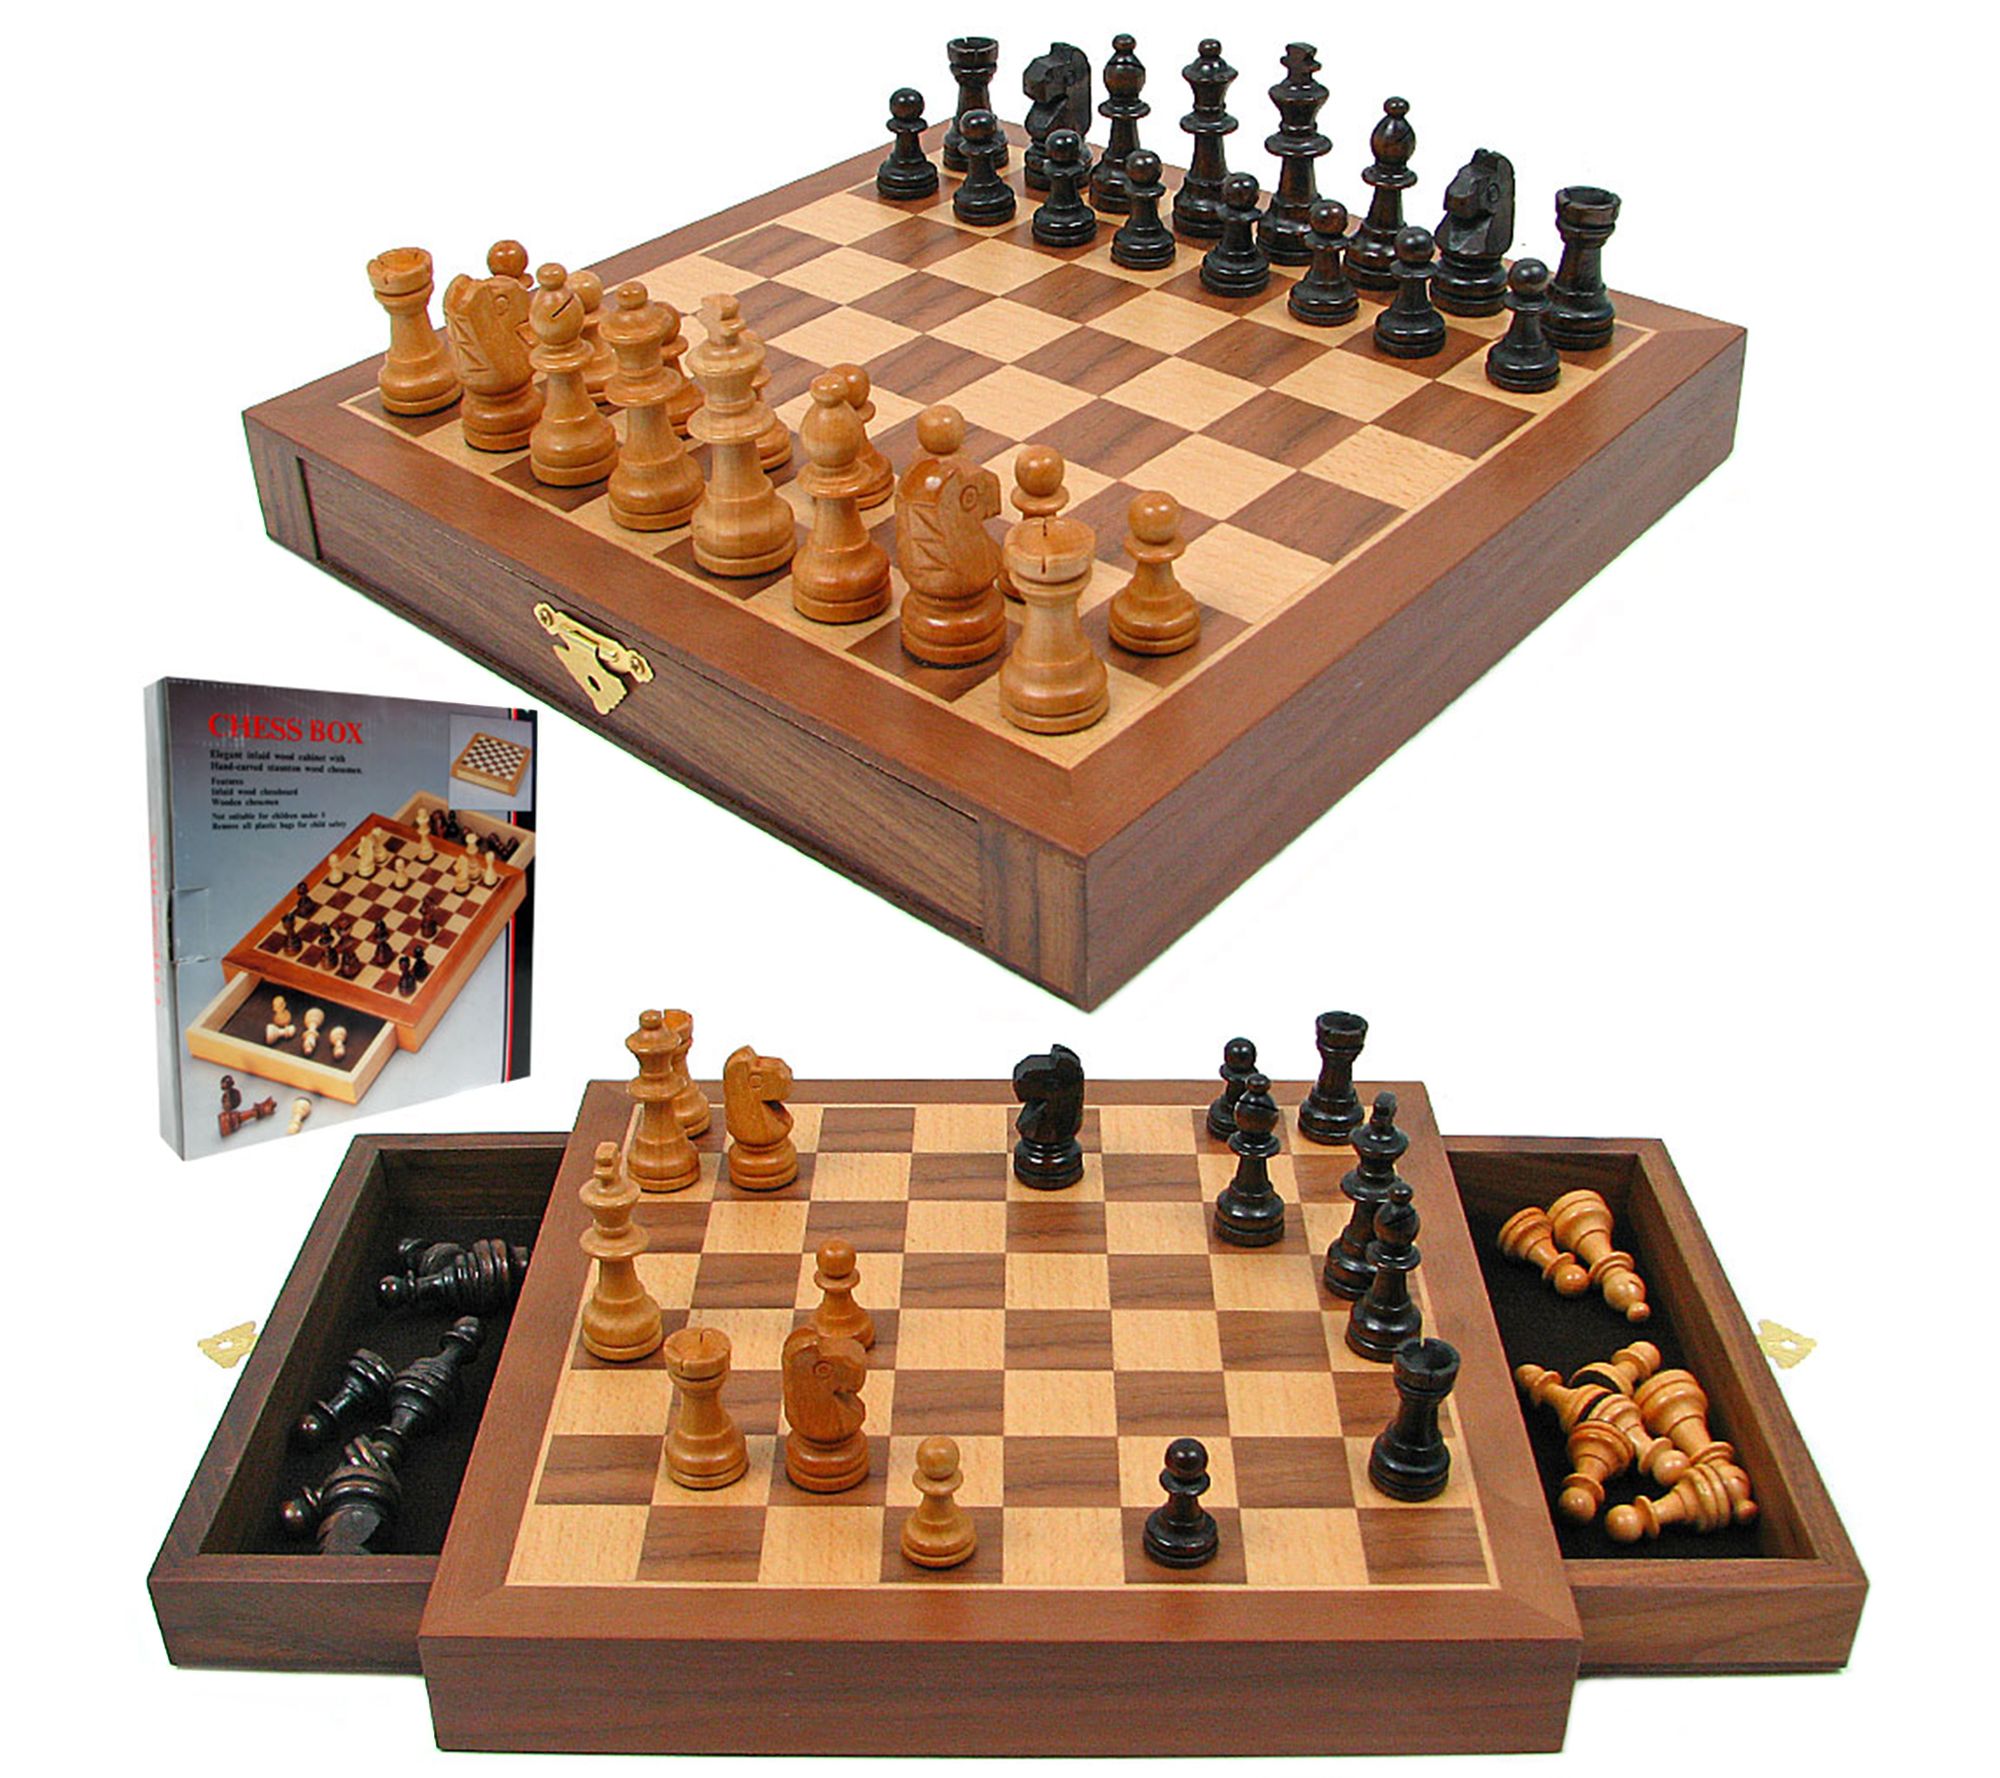 Customer Reviews: Toy Time Classic Strategy Chess Board Game Set Inlaid  Wood Magnetic Chess Board with Storage Drawer Tan, Black M350107 - Best Buy